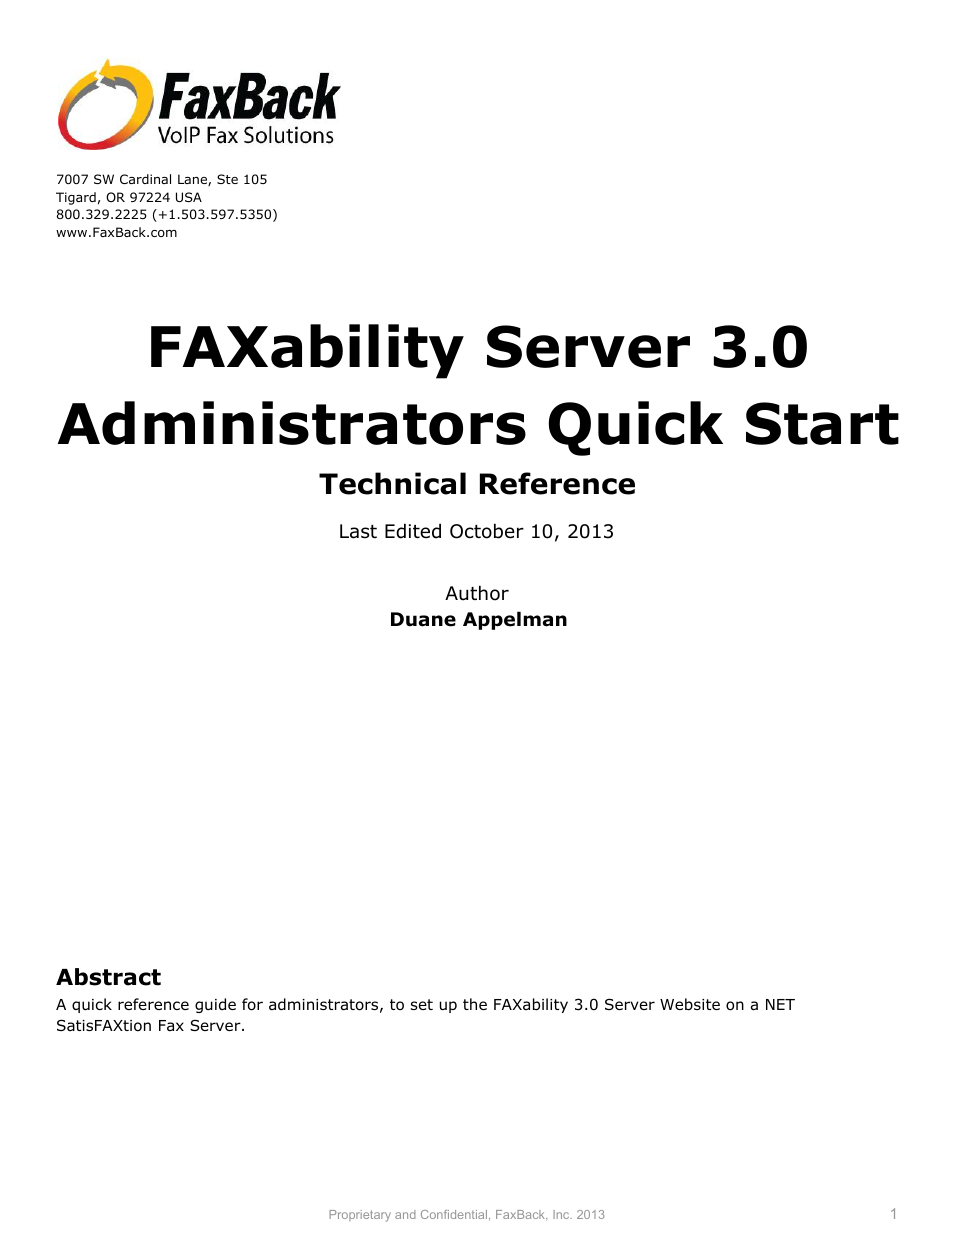 FAXability Server 3.0 - Quick Start Guide